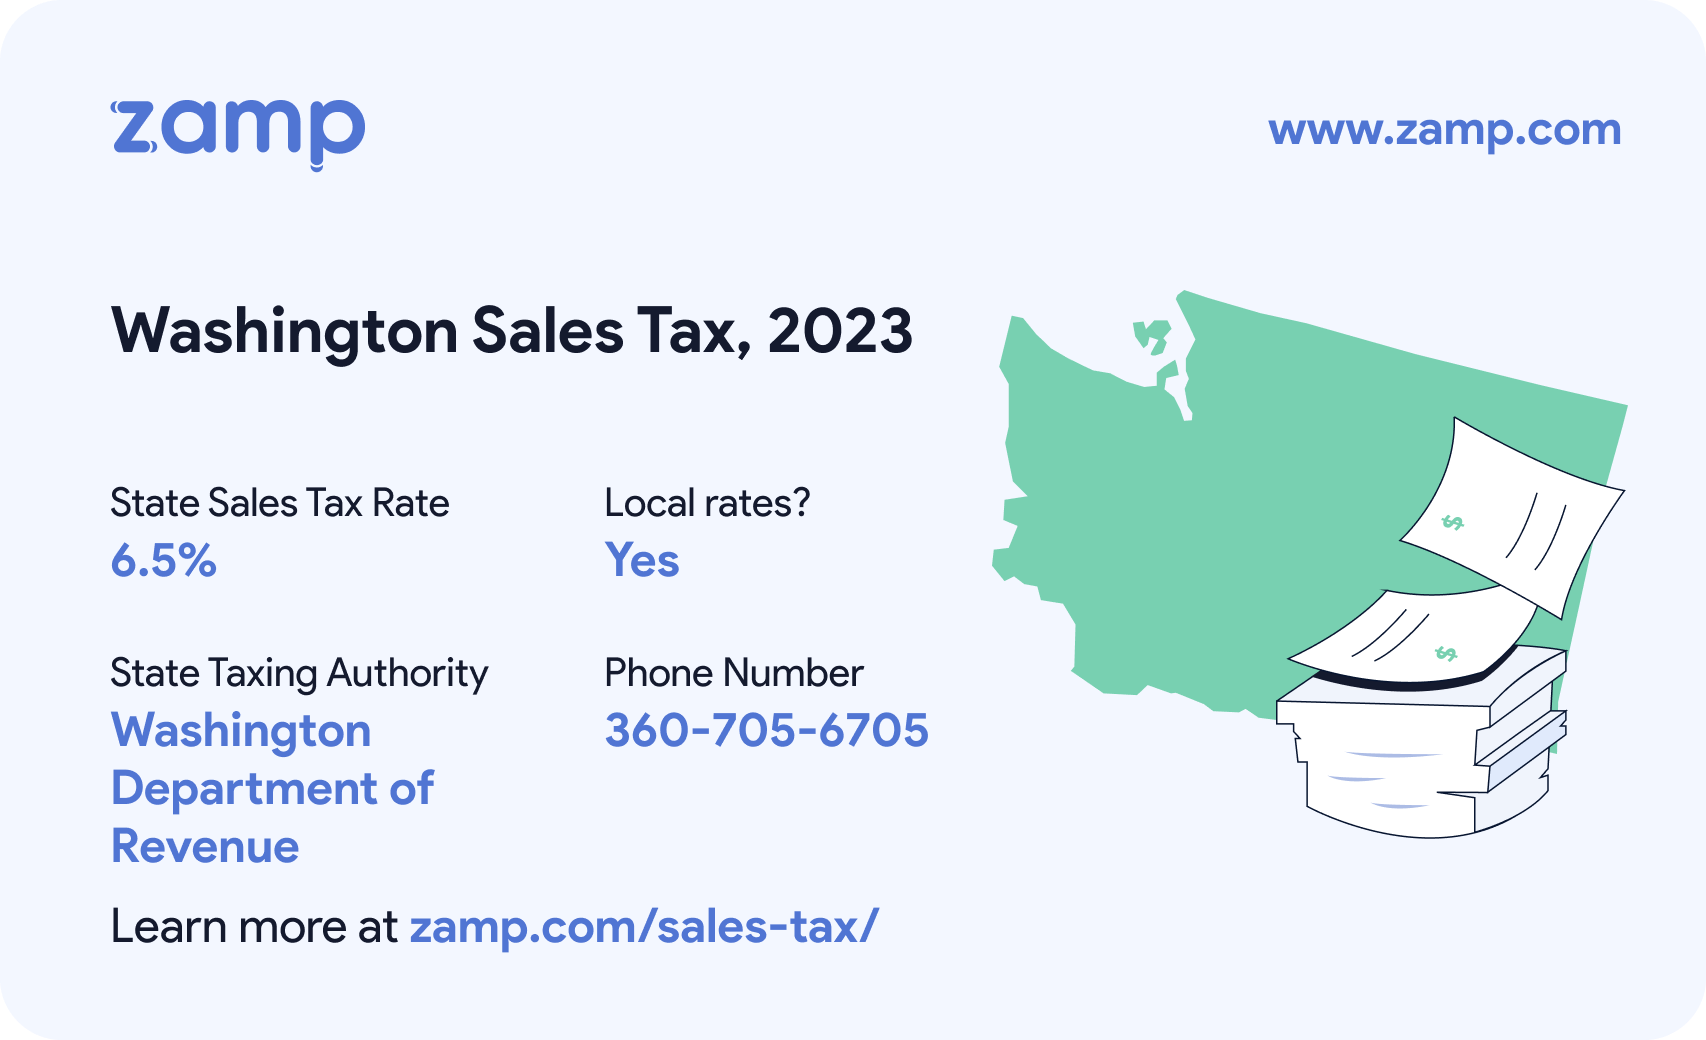 Washington basic sales tax info for 2023 - State sales tax rate: 6.5%, Local rates? Yes; State Taxing Authority: Washington Department of Revenue; and phone number 360-705-6705